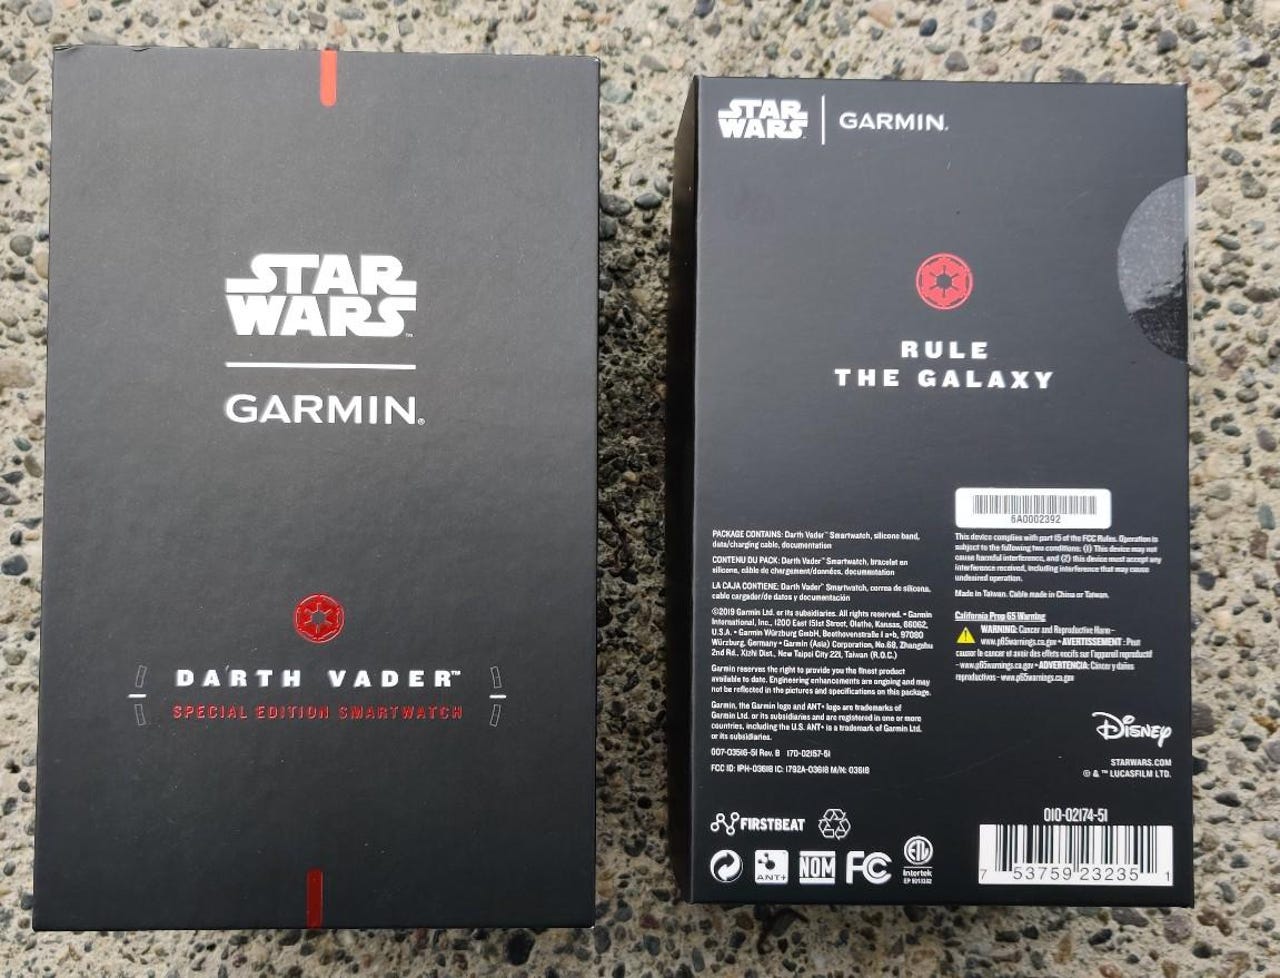 Garmin Vader Legacy Saga Series review: Star Wars themed sports watch offers extensive health and fitness features | ZDNET